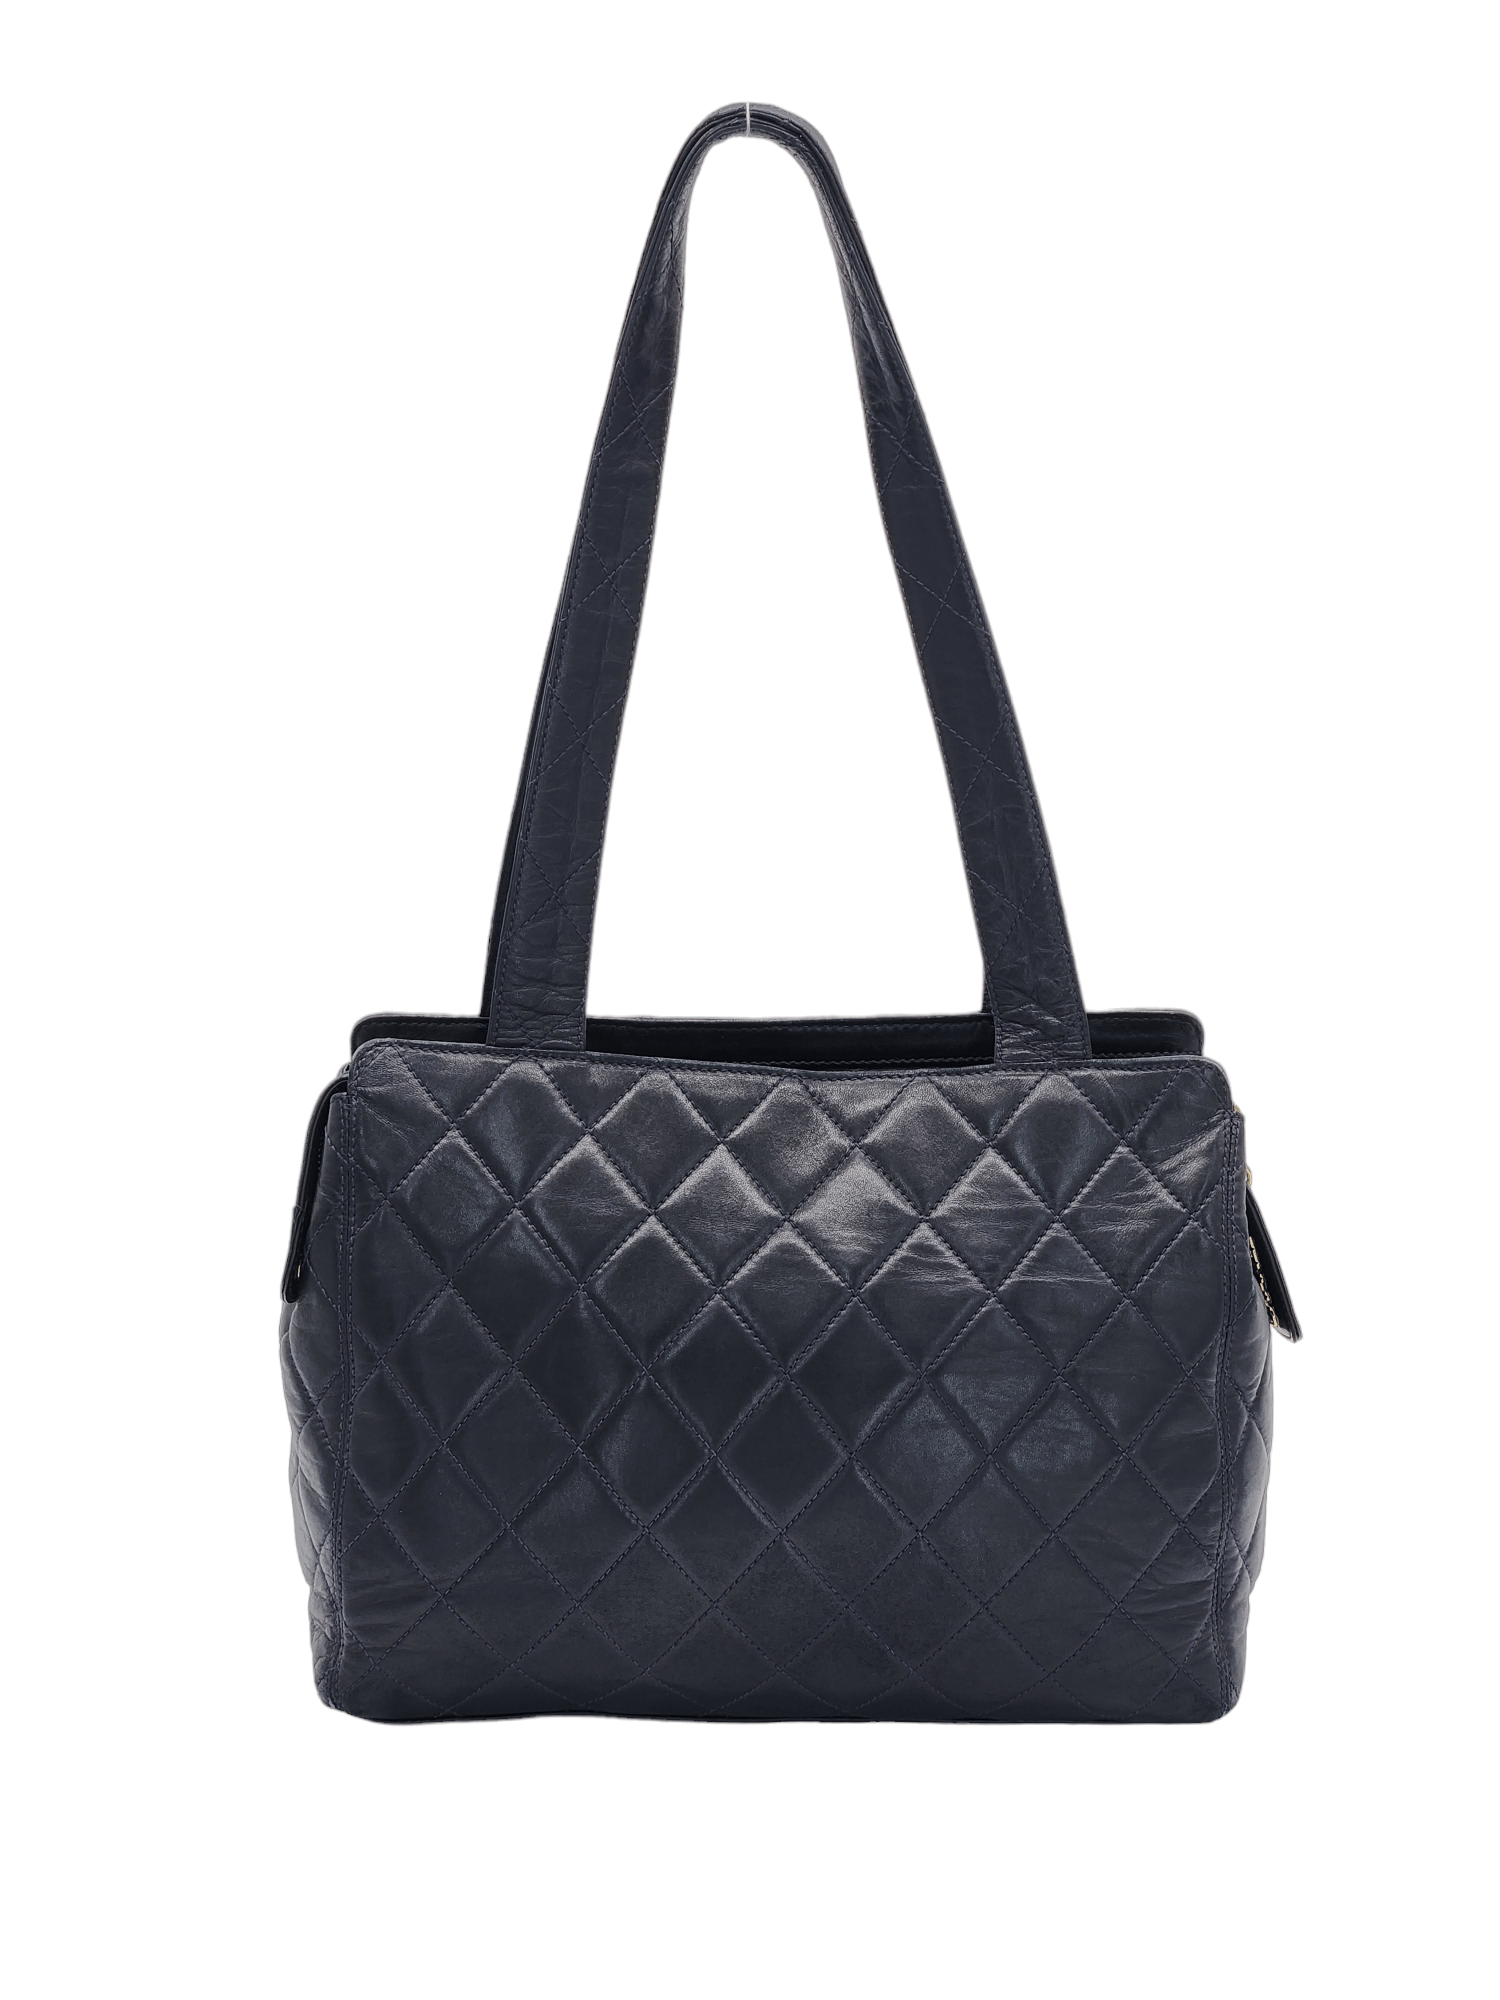 Chanel CC Black Quilted Lambskin Leather Tote Bag